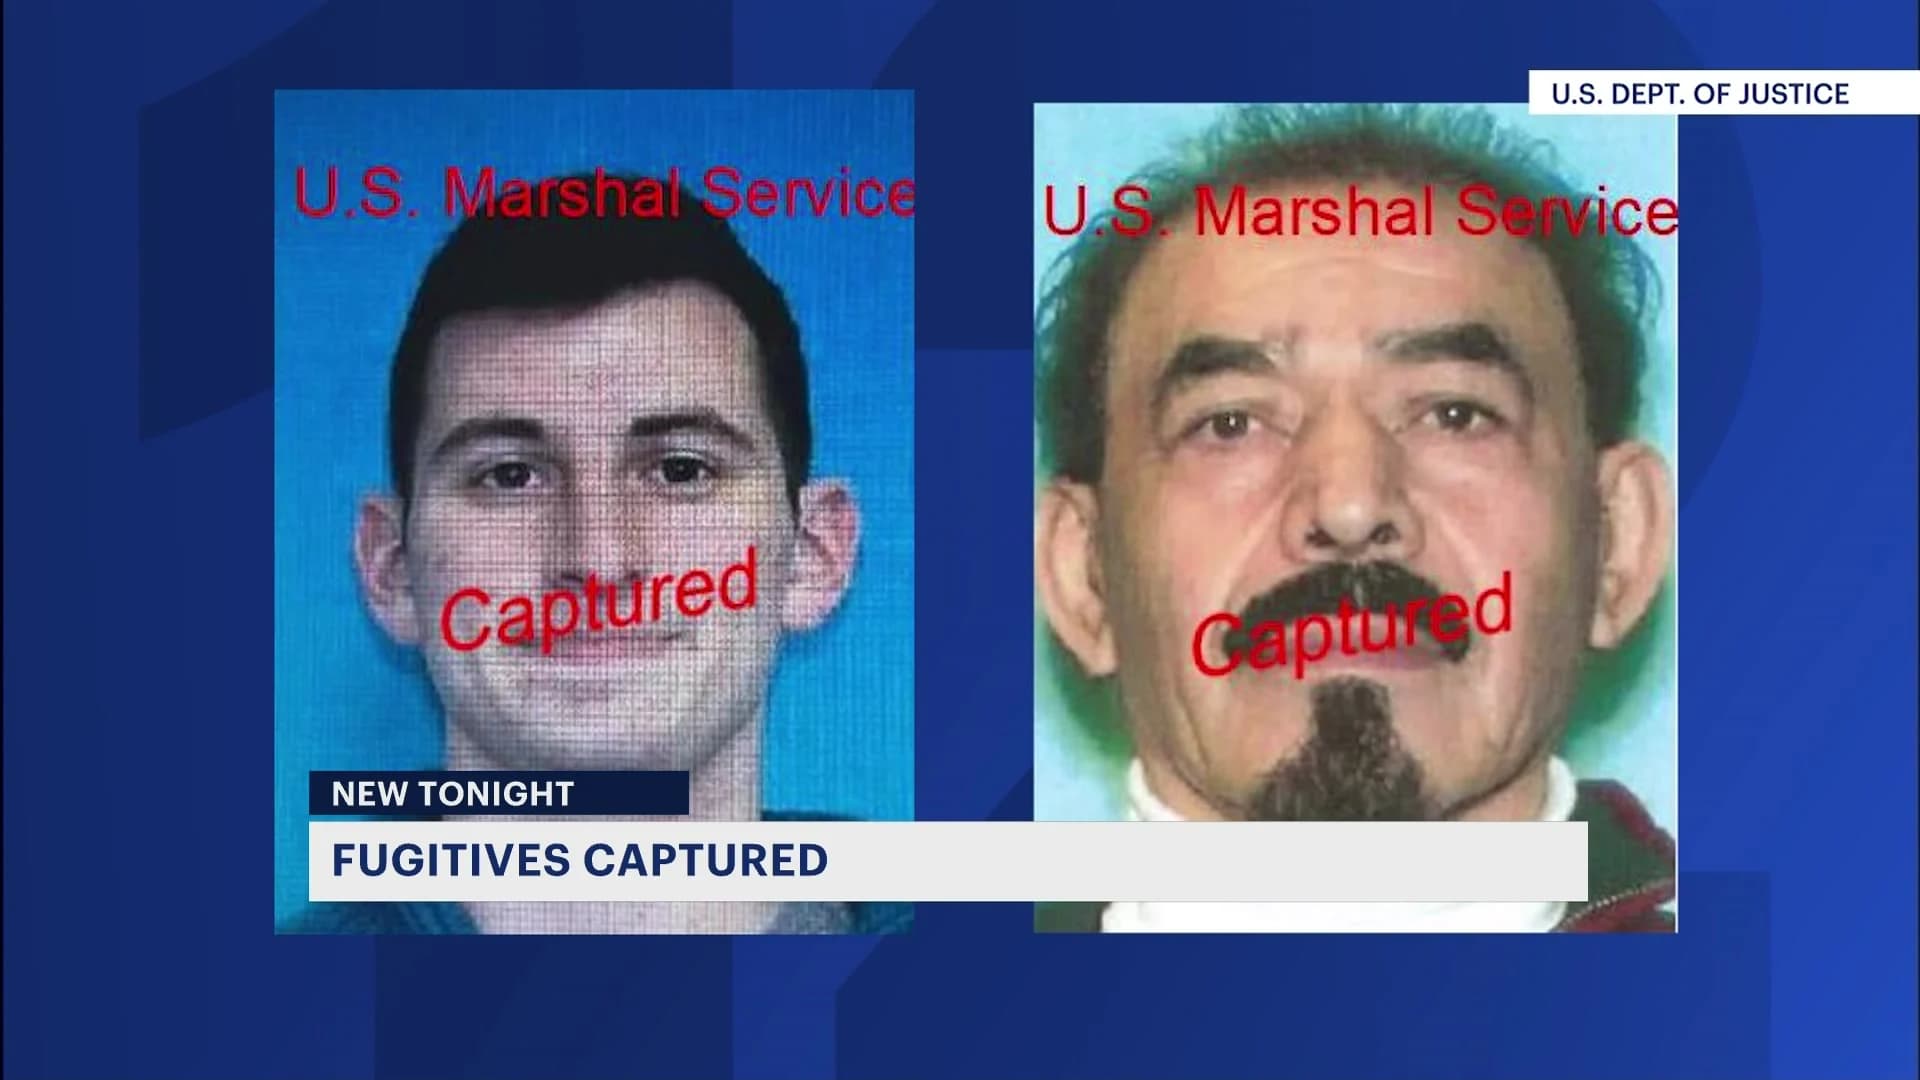 Two fugitives wanted in separate incidents arrested in Connecticut